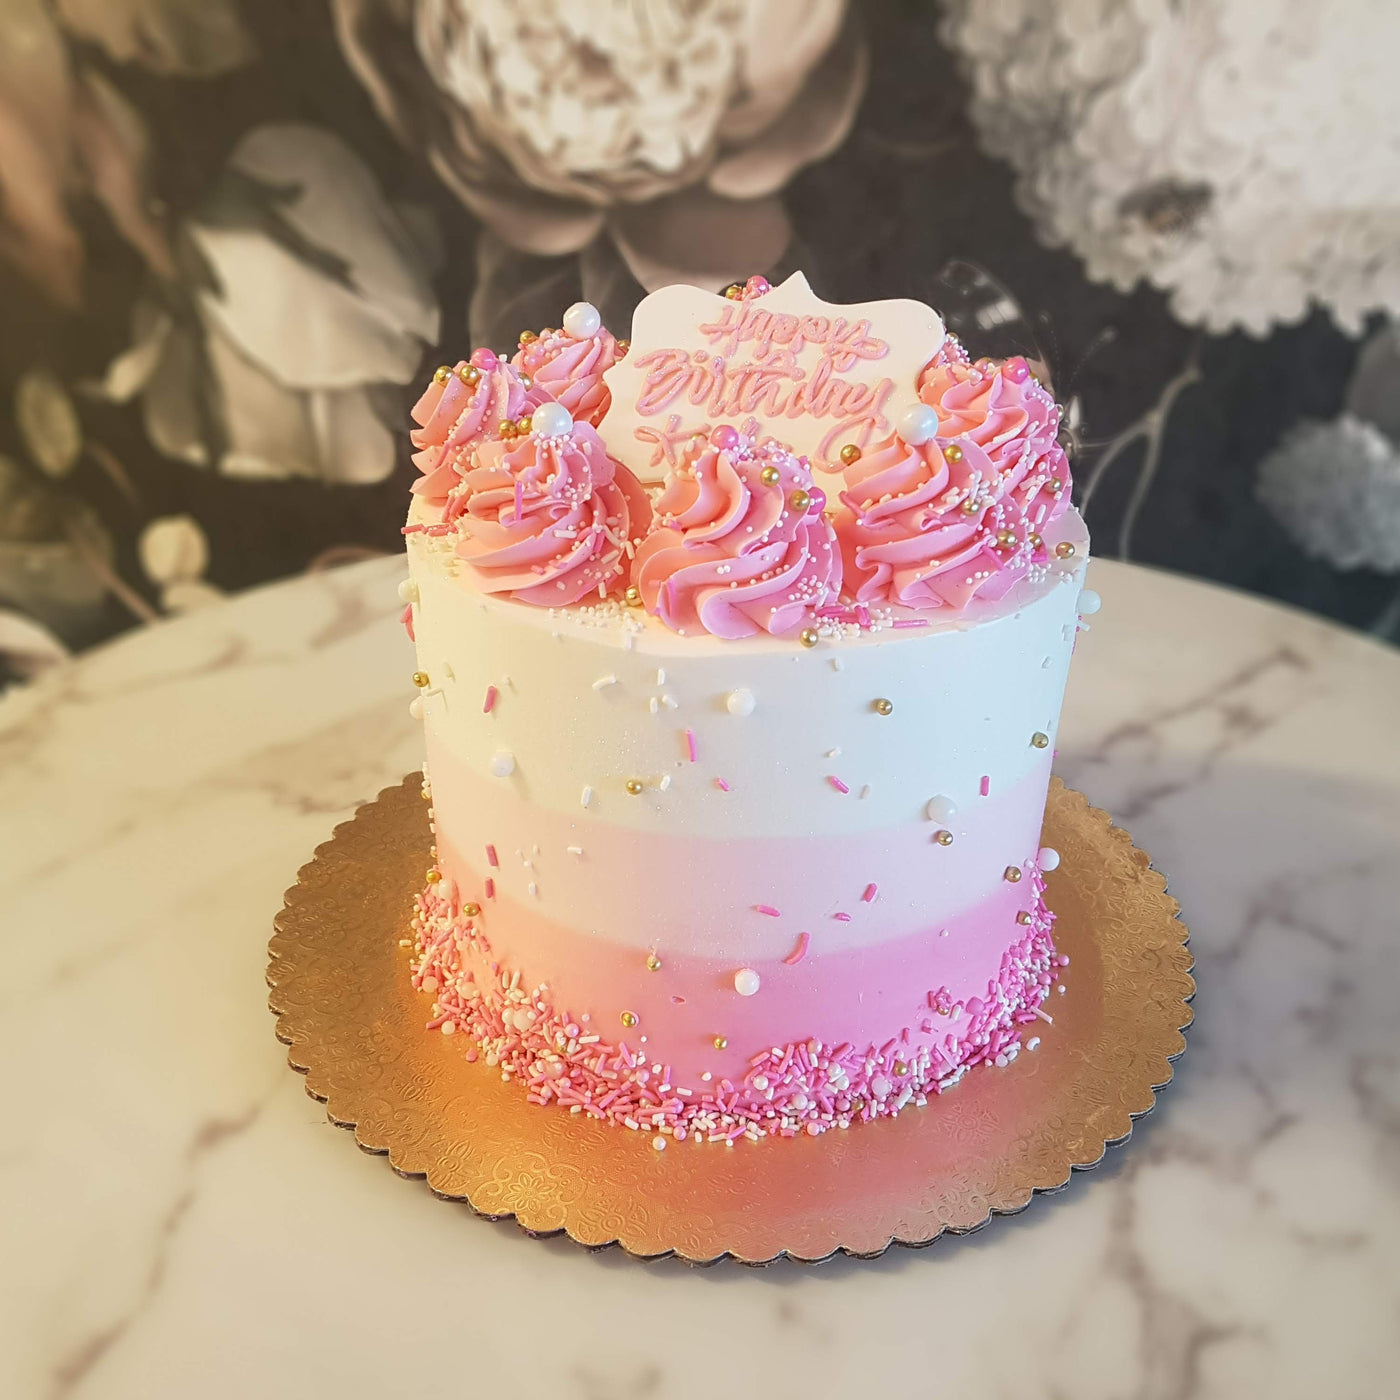 Two Years of Lil Cupcake Monkey: Pink Ombre Cake with Confetti Buttercream  Frosting - Lil Cupcake Monkey